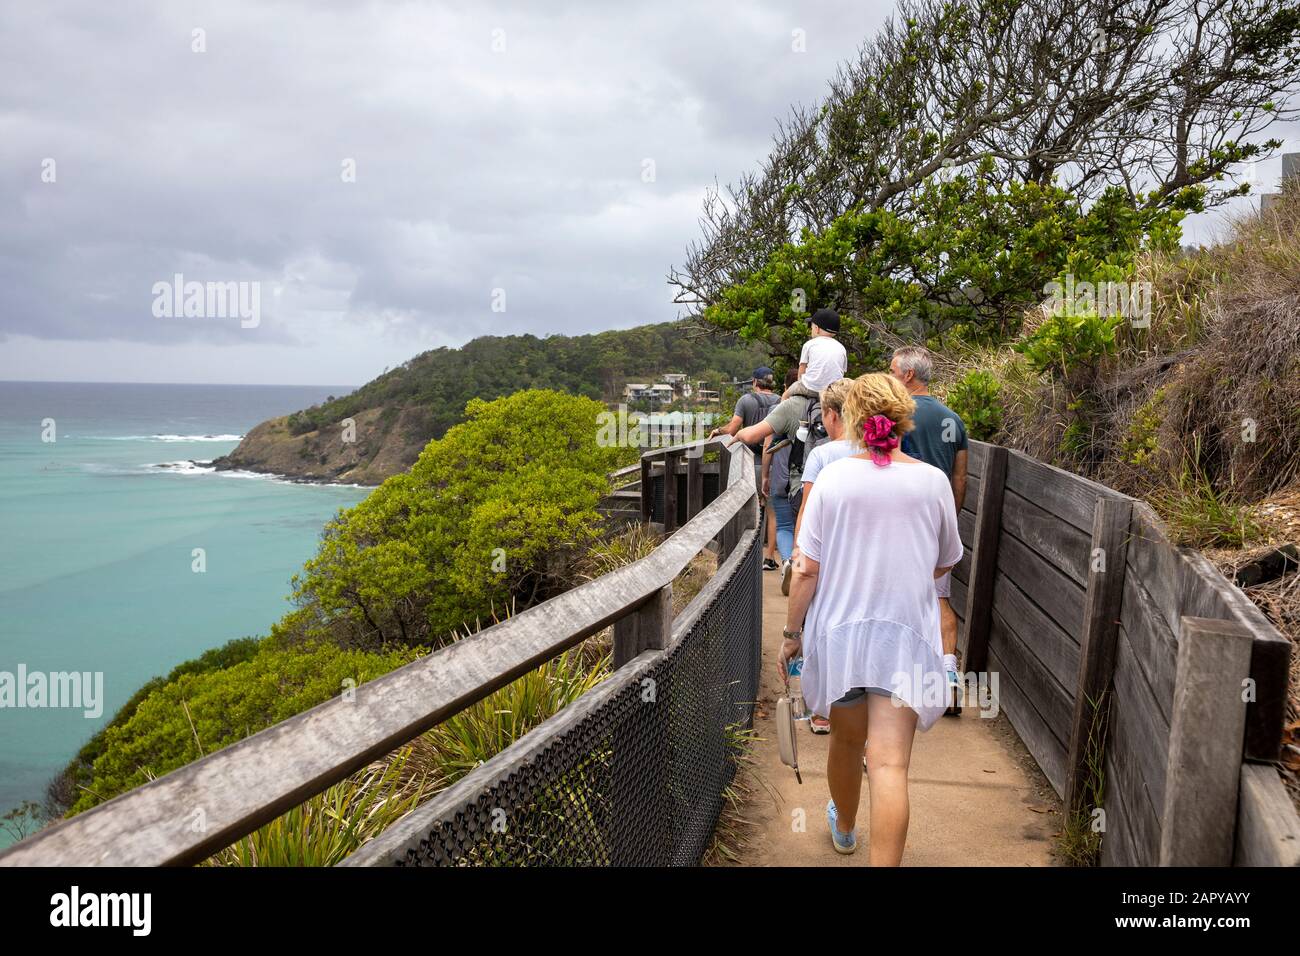 Byron Bay, Cape Byron coastal walk path is popular with tourists and visitors to the town, Australia Stock Photo